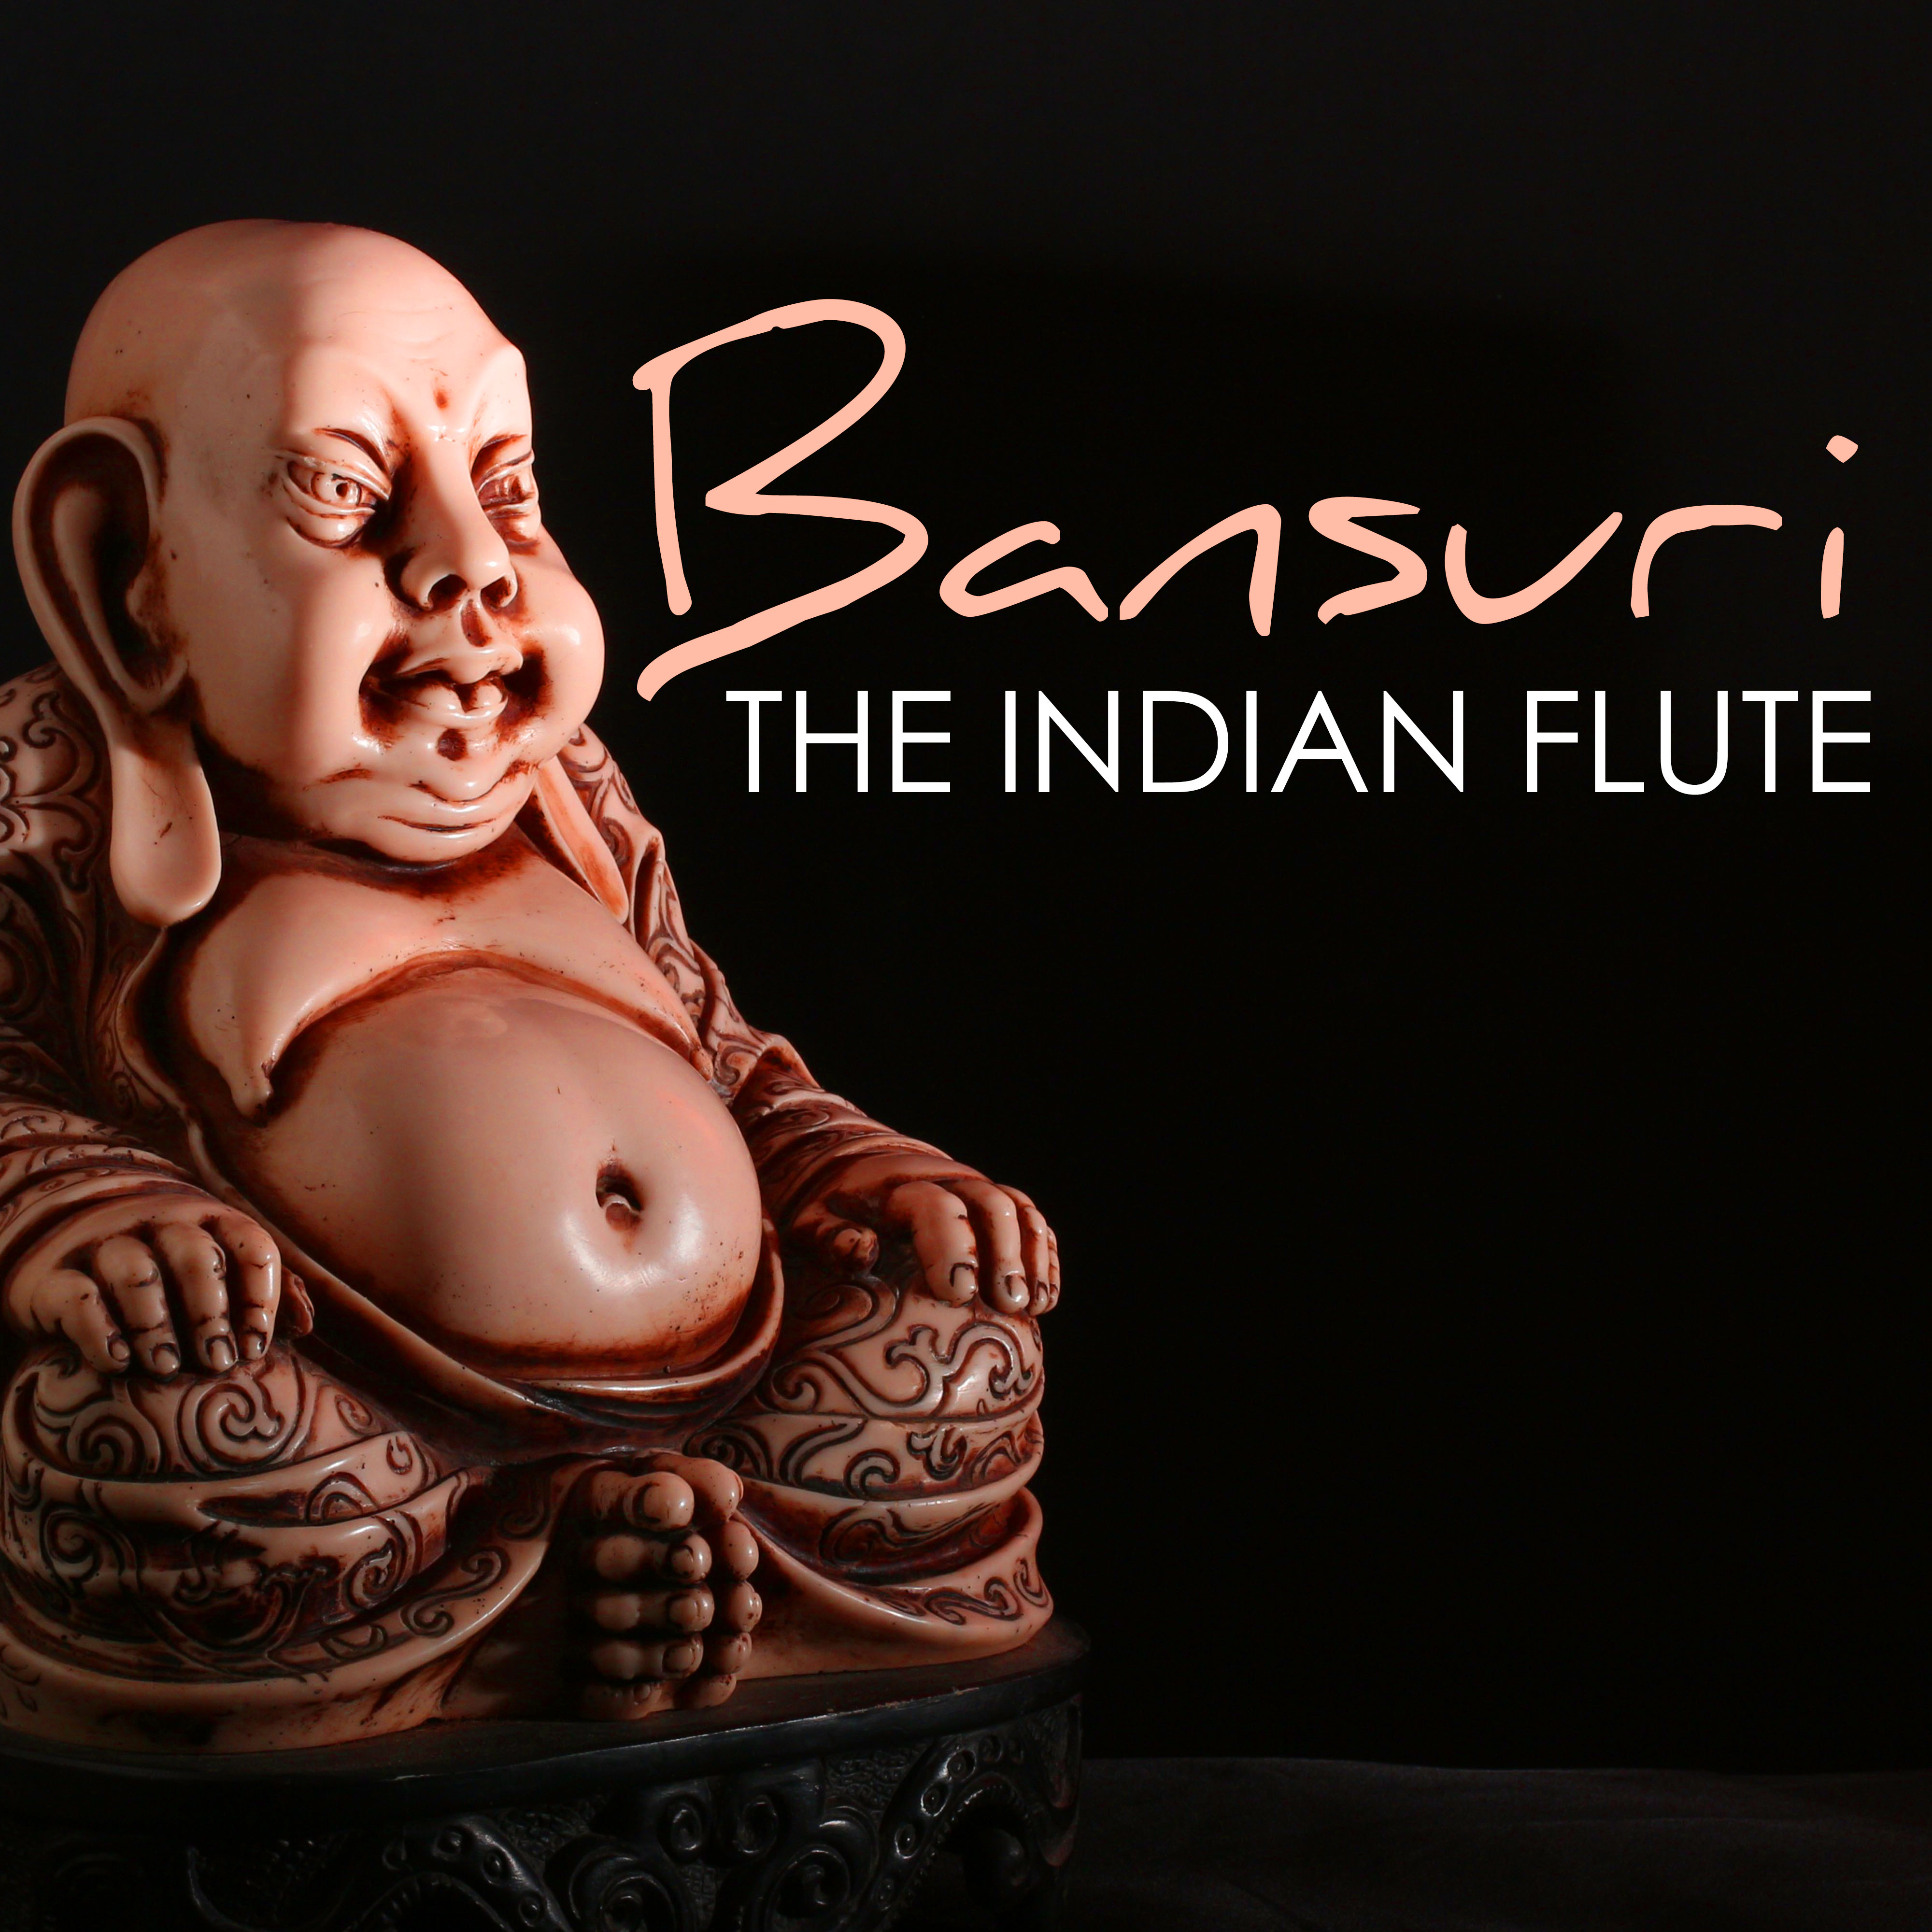 Bansuri, The Indian Flute - Relaxation Spa Songs for Yoga & Meditation Practices